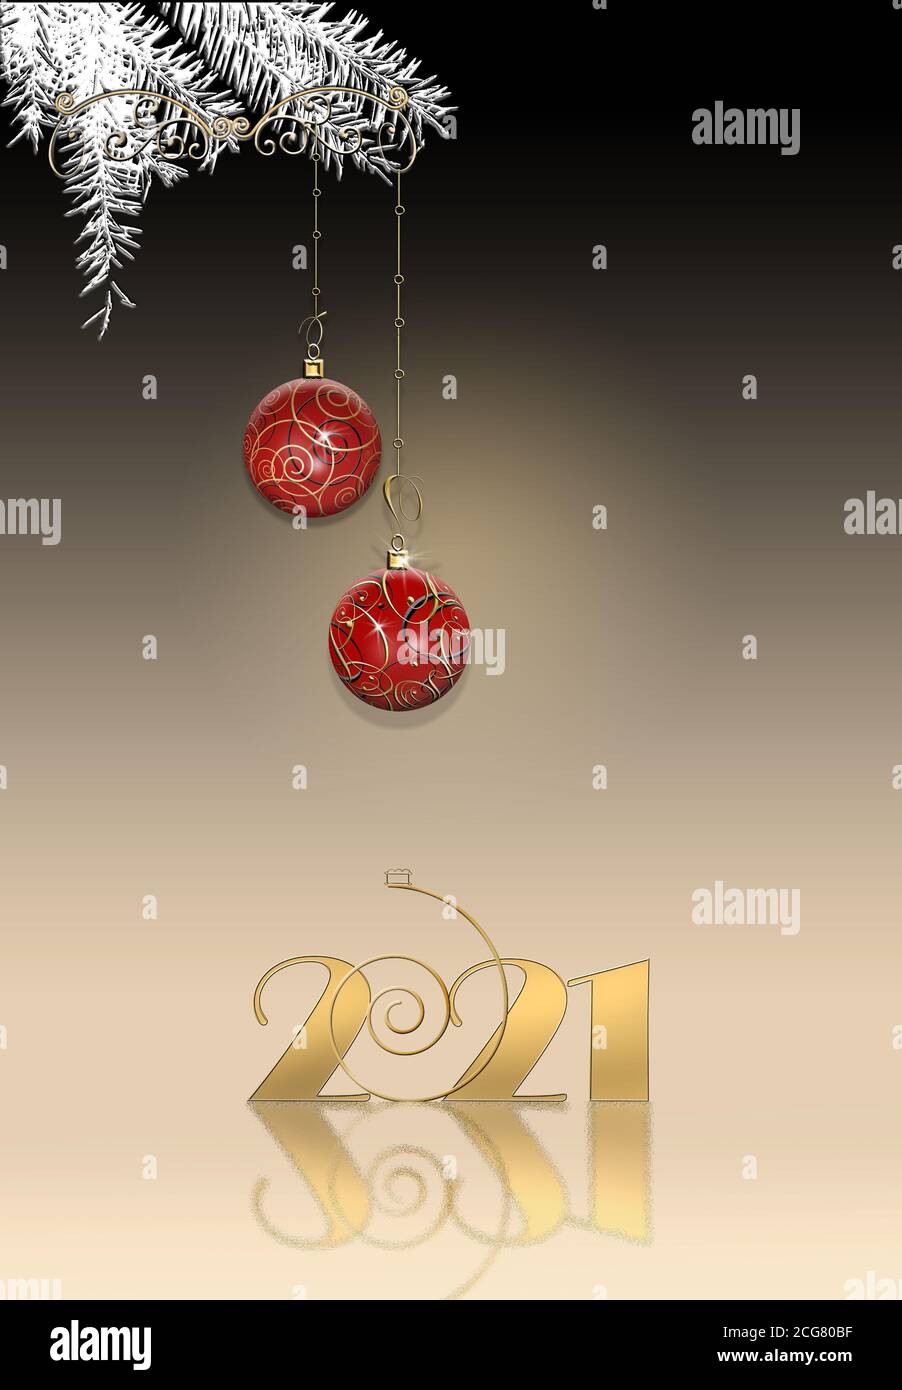 Luxury elegant Christmas 2021 New Year ornament with red gold bauble with gold confetti, digit 2021 on black background. Vertical 2021 New Year card. Place for text, copy space. 3D Illustration. Stock Photo